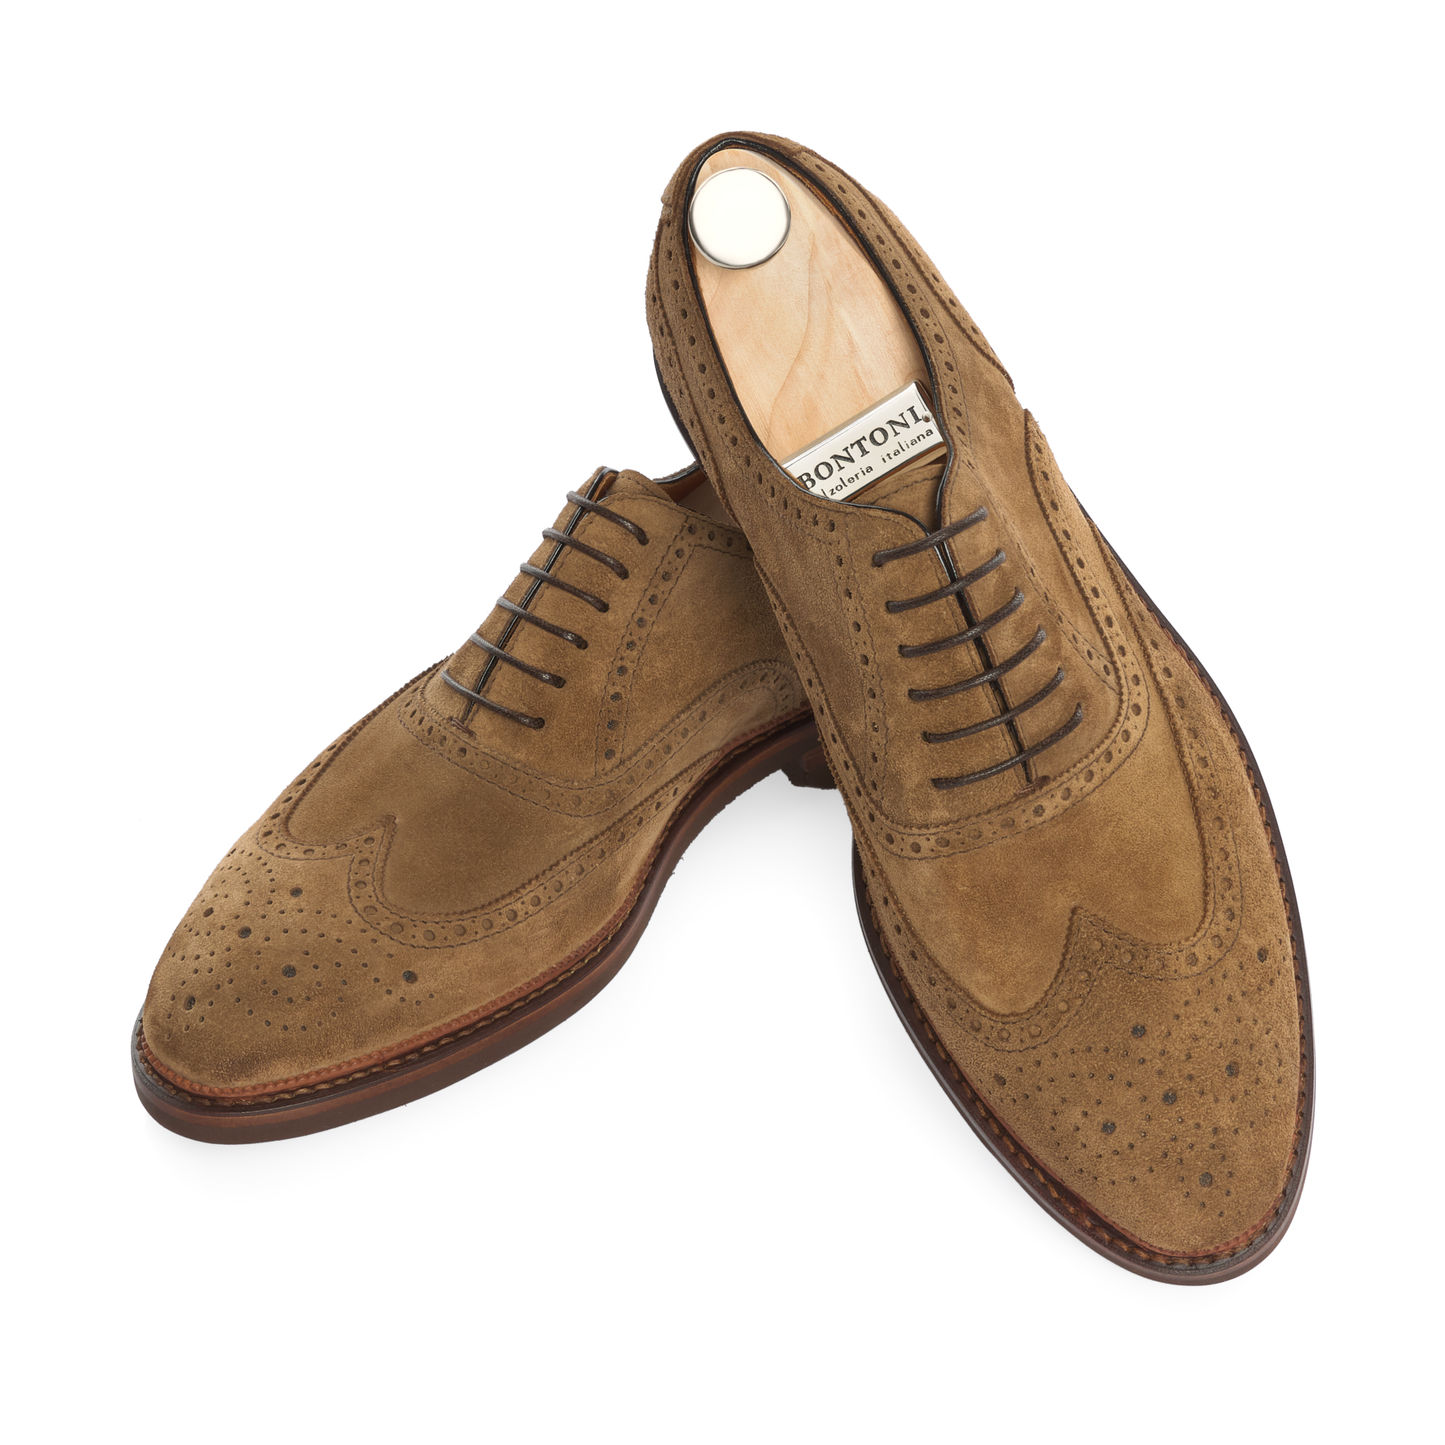 Bontoni «Libertino» Six-Eyelet Oxford Shoes with Perforated Details and Medallion in Brown - SARTALE